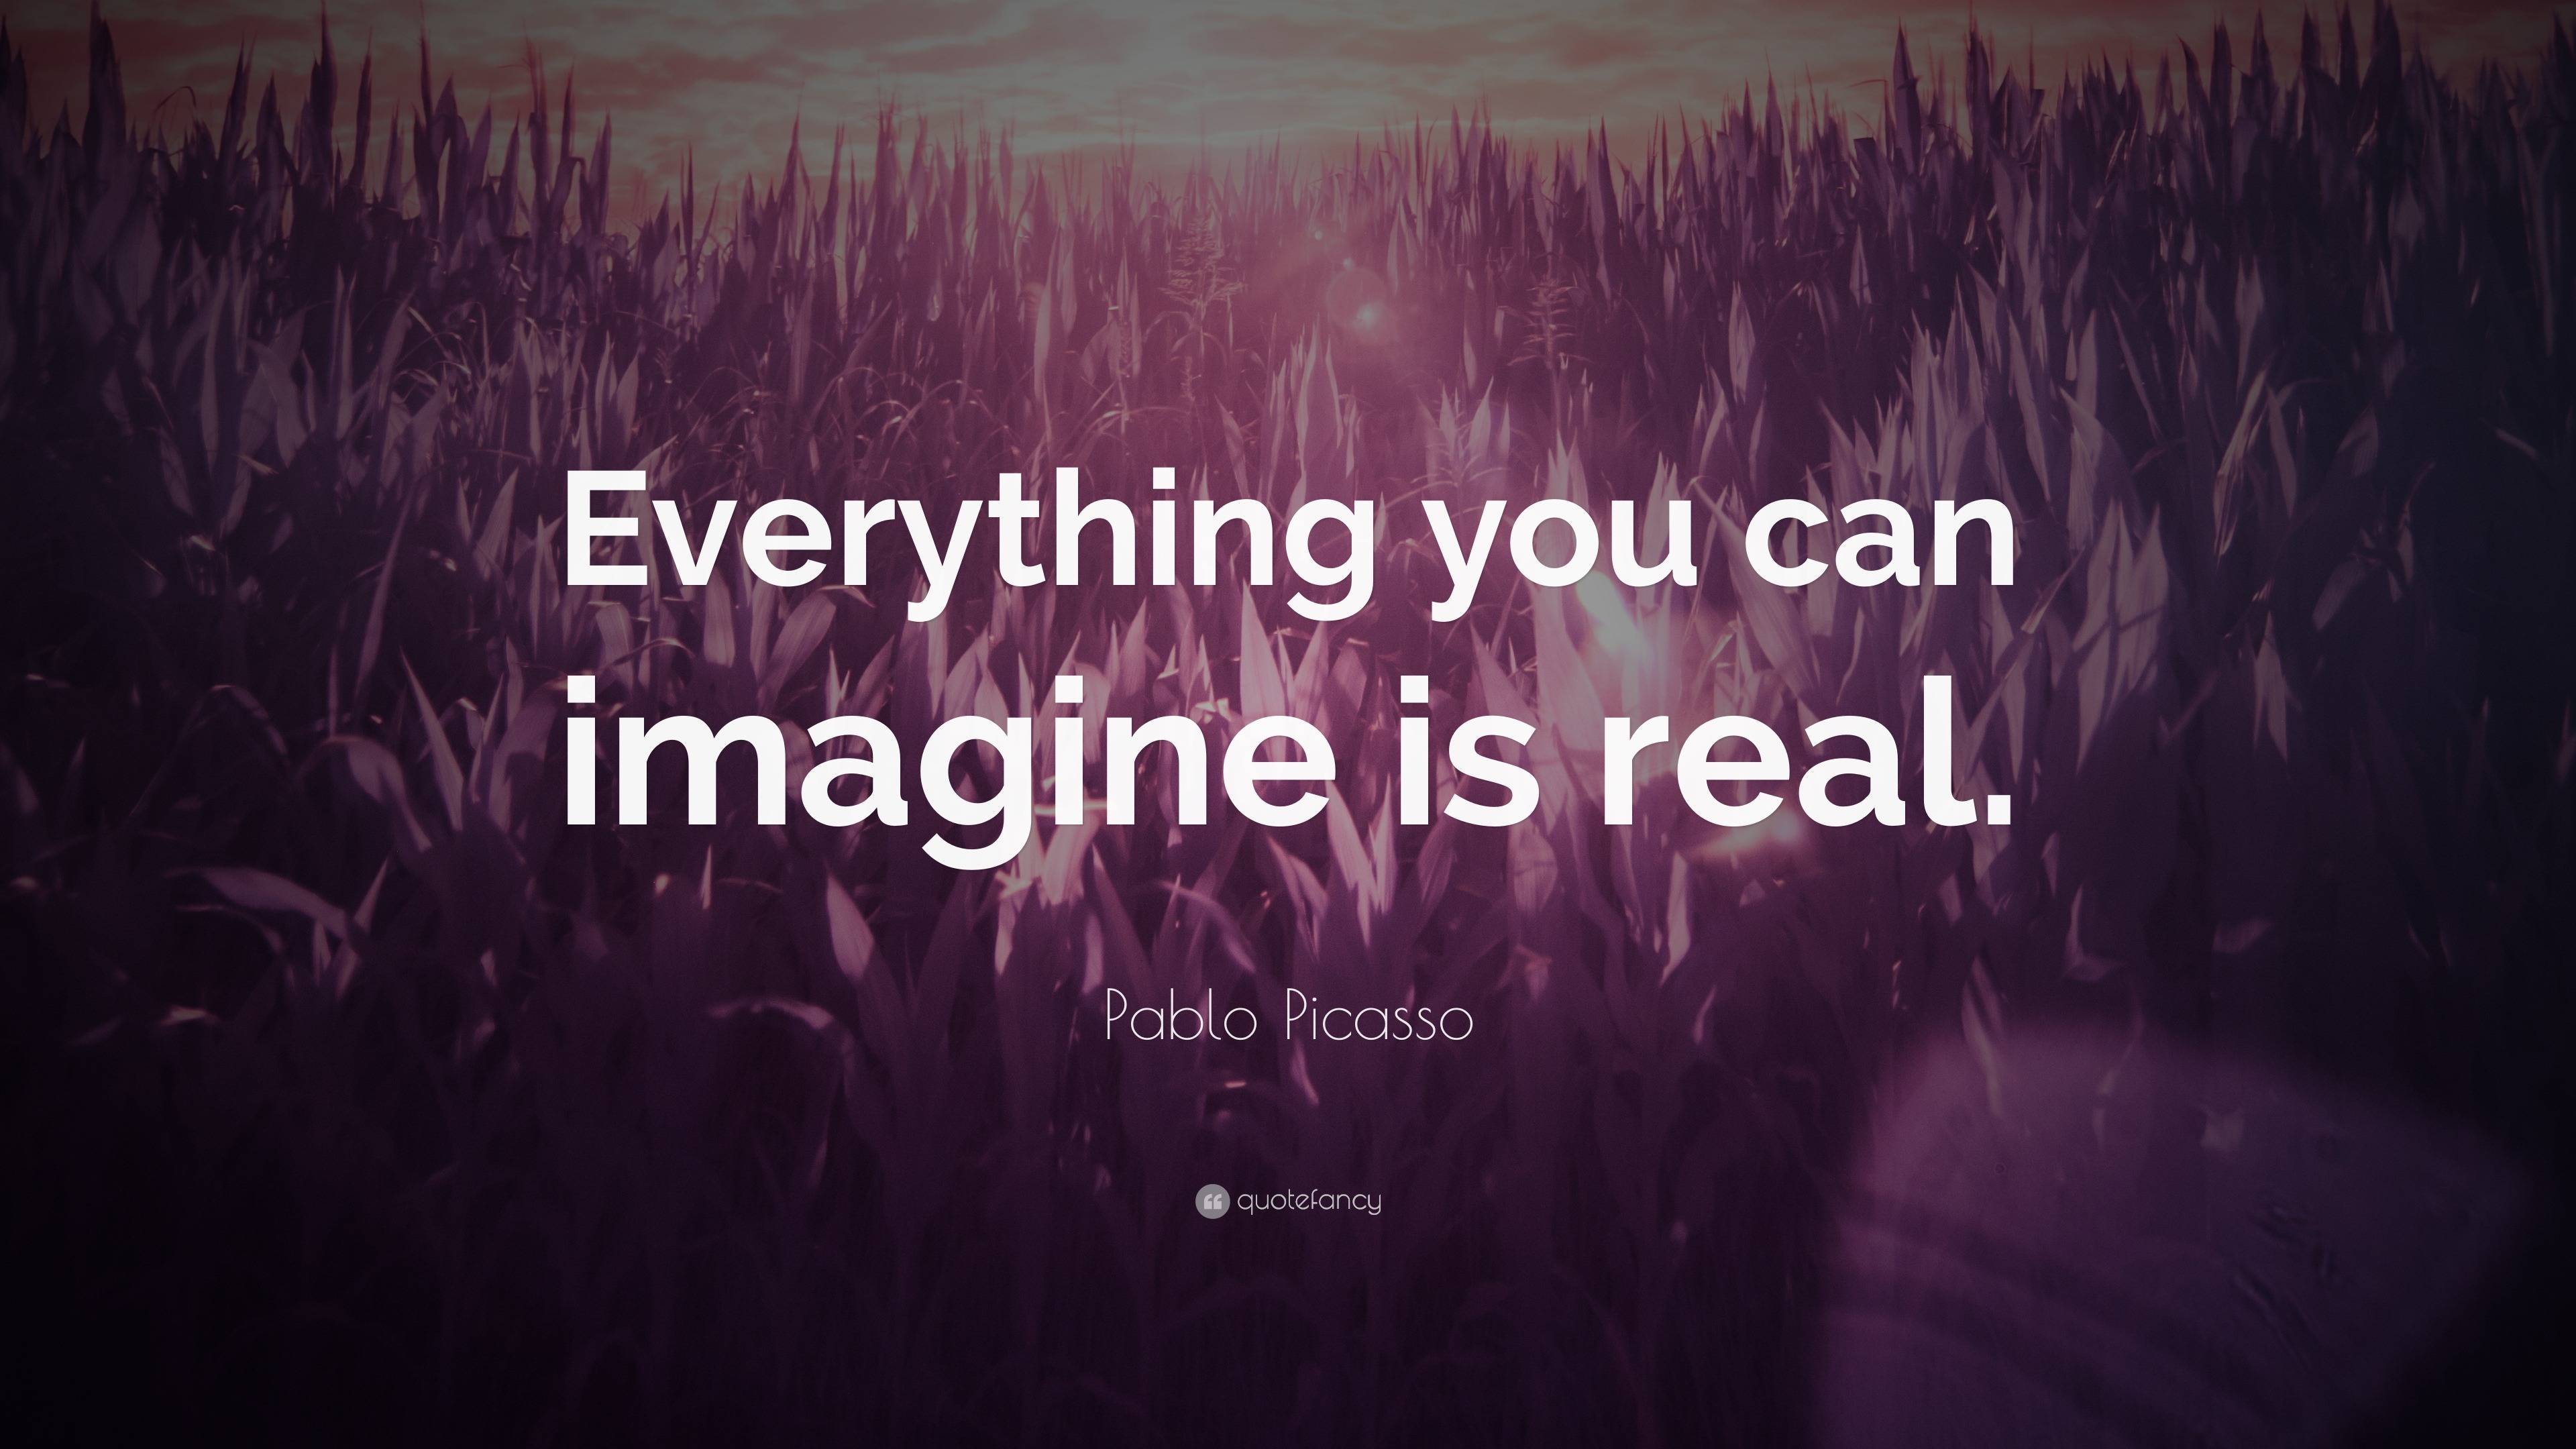 Everything you can imagine is real Picasso. Everything you imagine is real. Everything you can imagine. You can imagine is real. Can you imagine your